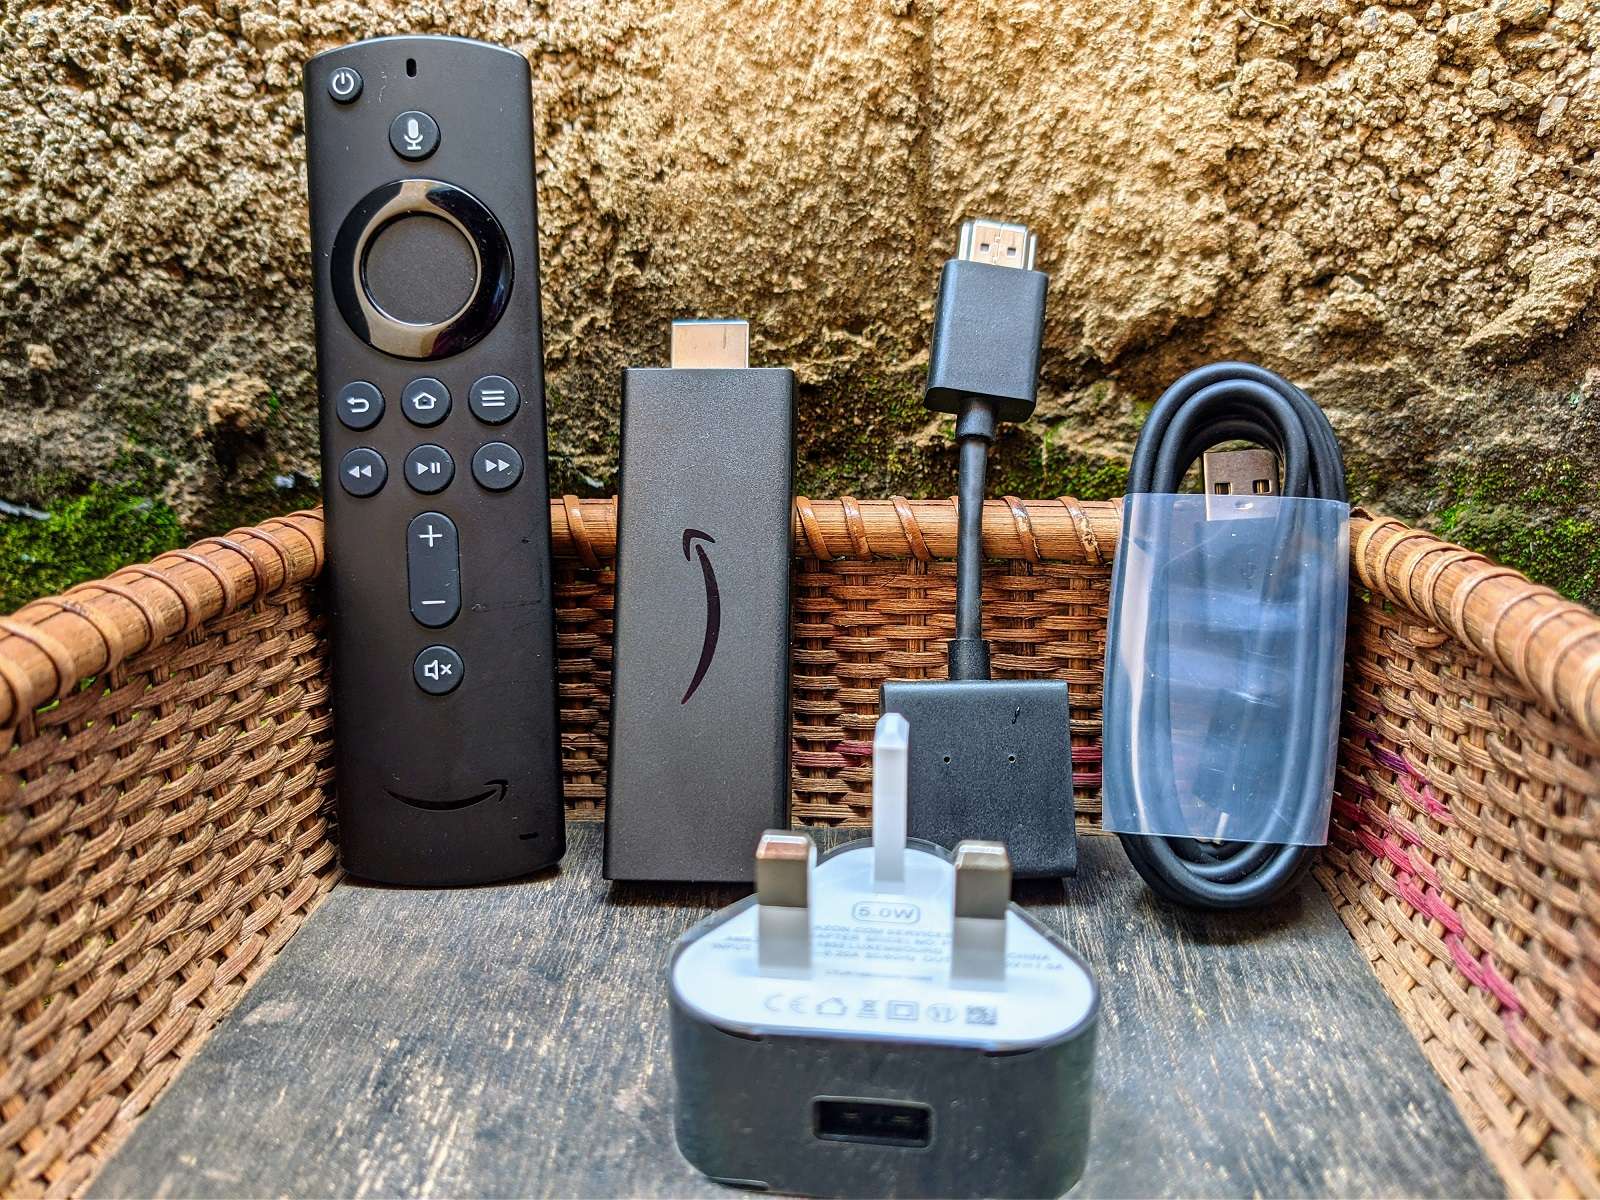 Fire TV Stick (3rd Gen) review: Turn any TV into Smart TV